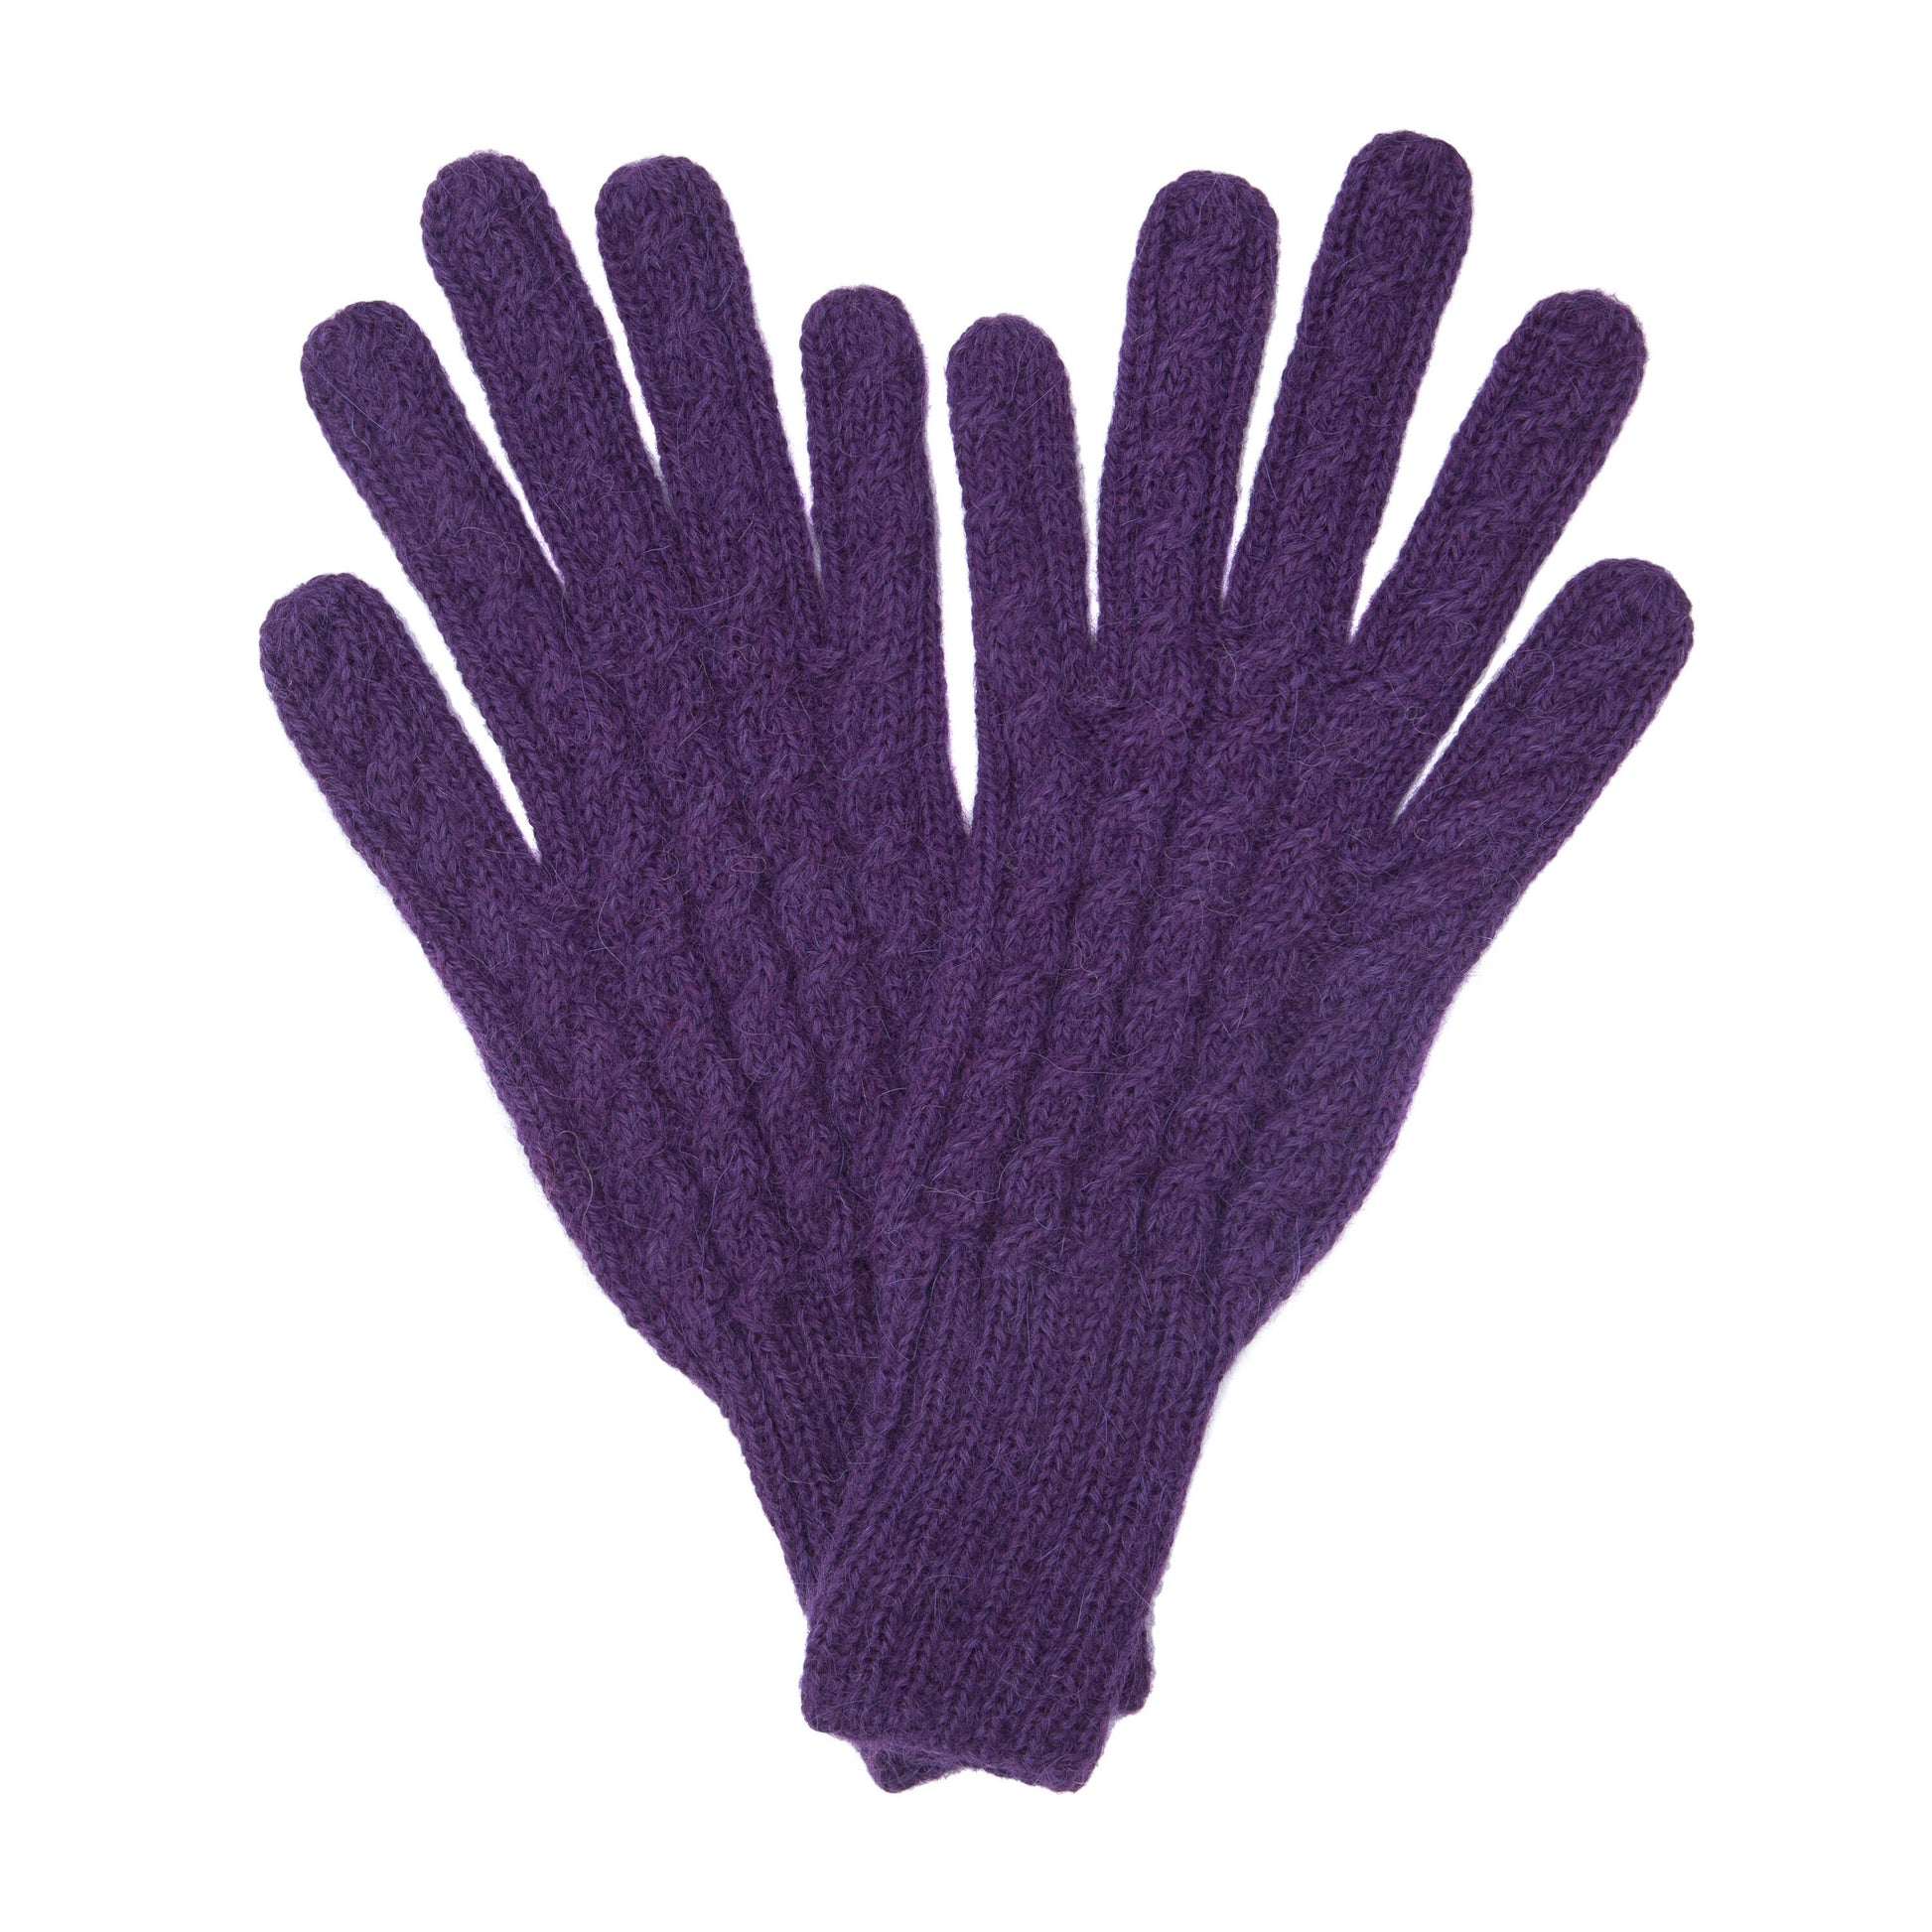 100% Alpaca Gloves, Purple, Hand Knitted, Warm wool gloves, Ethical, Fair Trade Gift